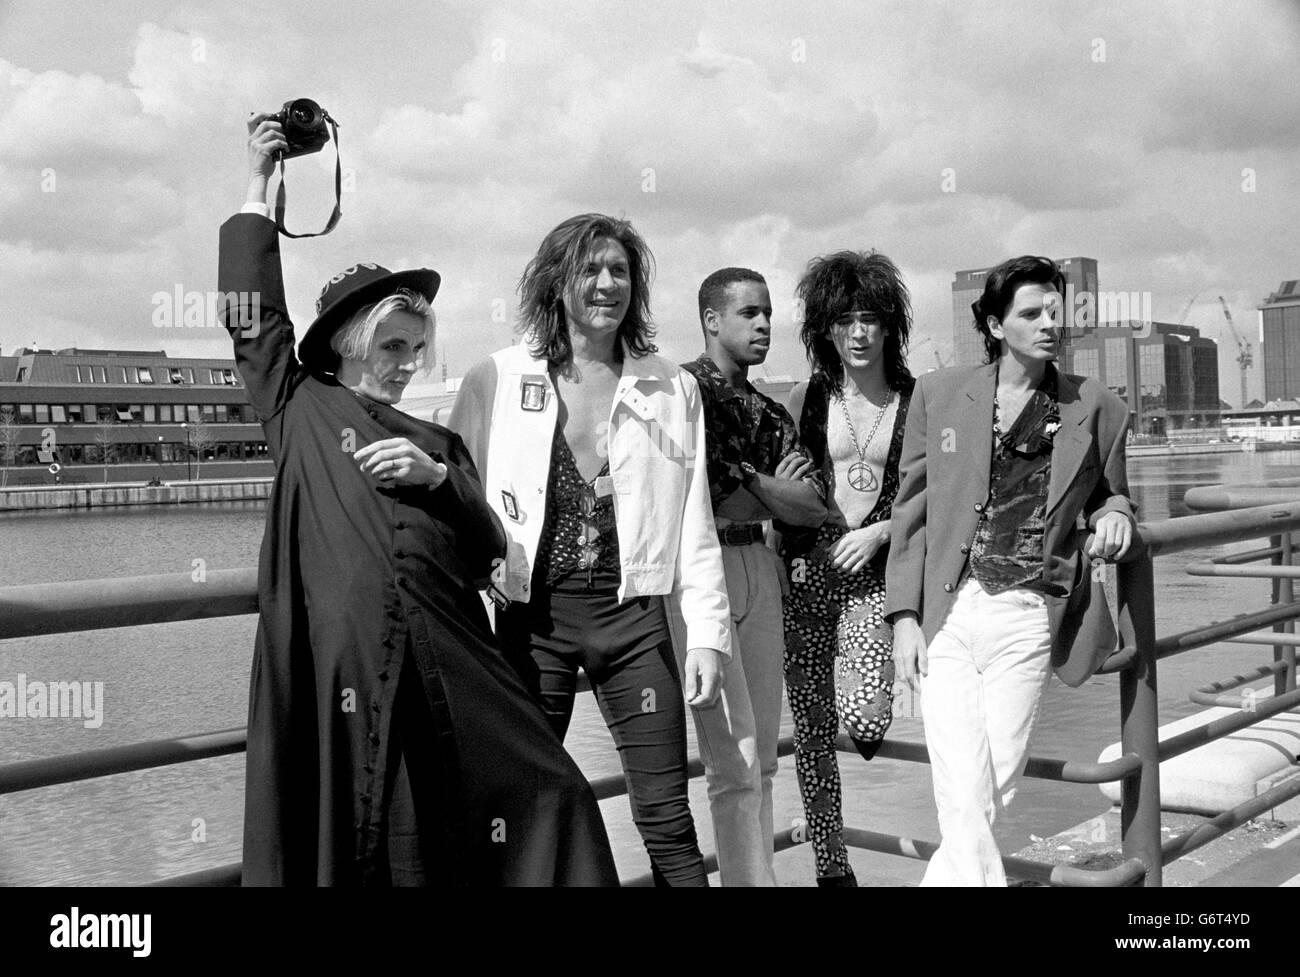 Pop group Duran Duran take a break from rehearsals at the London Arena at Limeharbour in London's Docklands, before starting a nationwide tour in Newcastle. L-R: Nick Rhodes, Simon Le Bon, Sterling Campbell, Warren Cuccurullo and John Taylor. Stock Photo